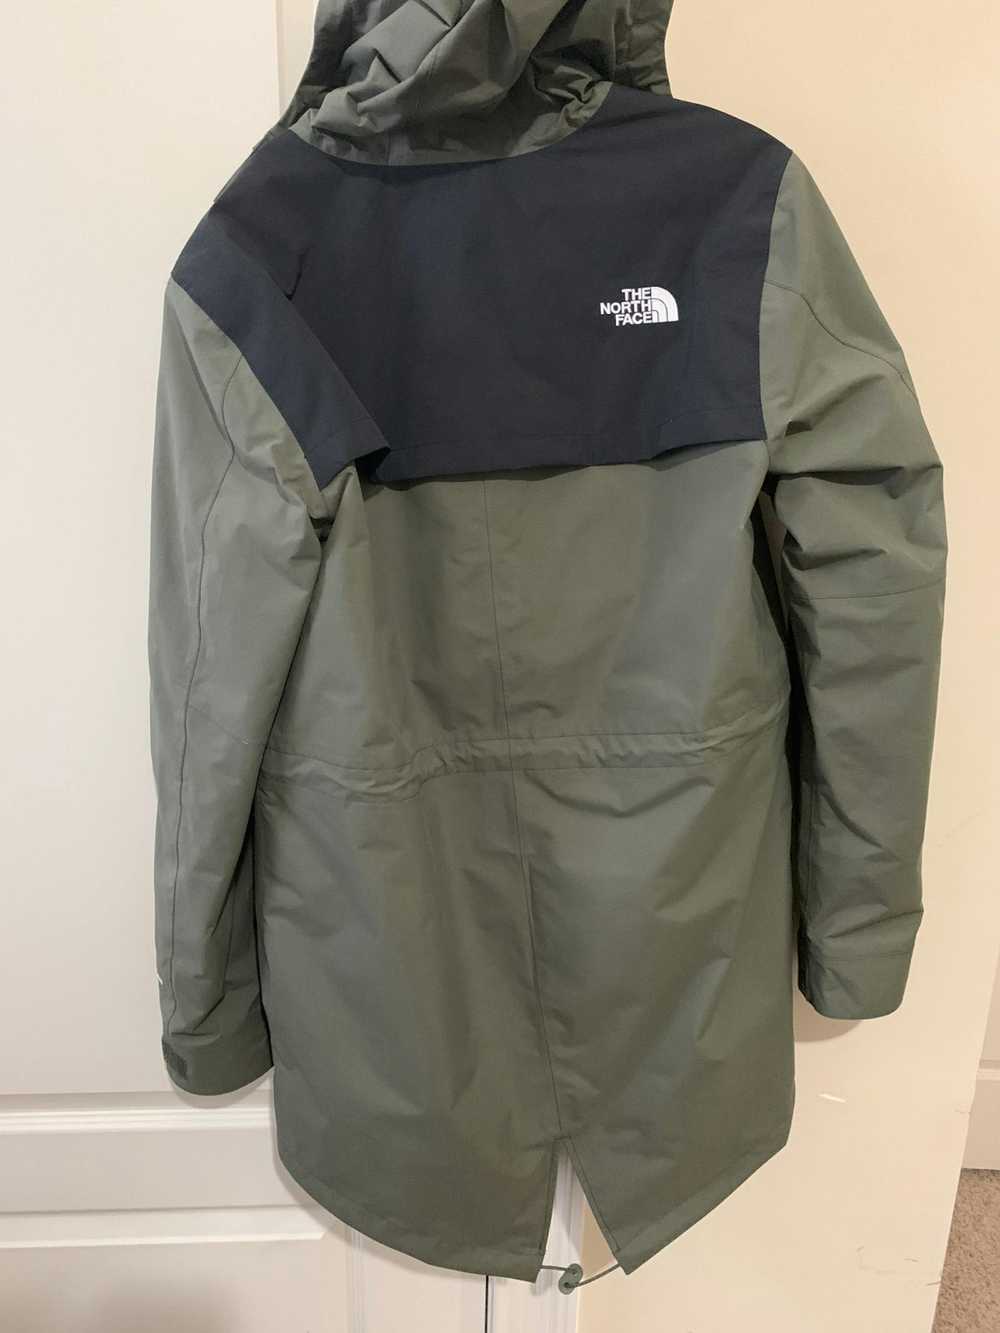 The North Face North Face City Breeze Jacket - image 3